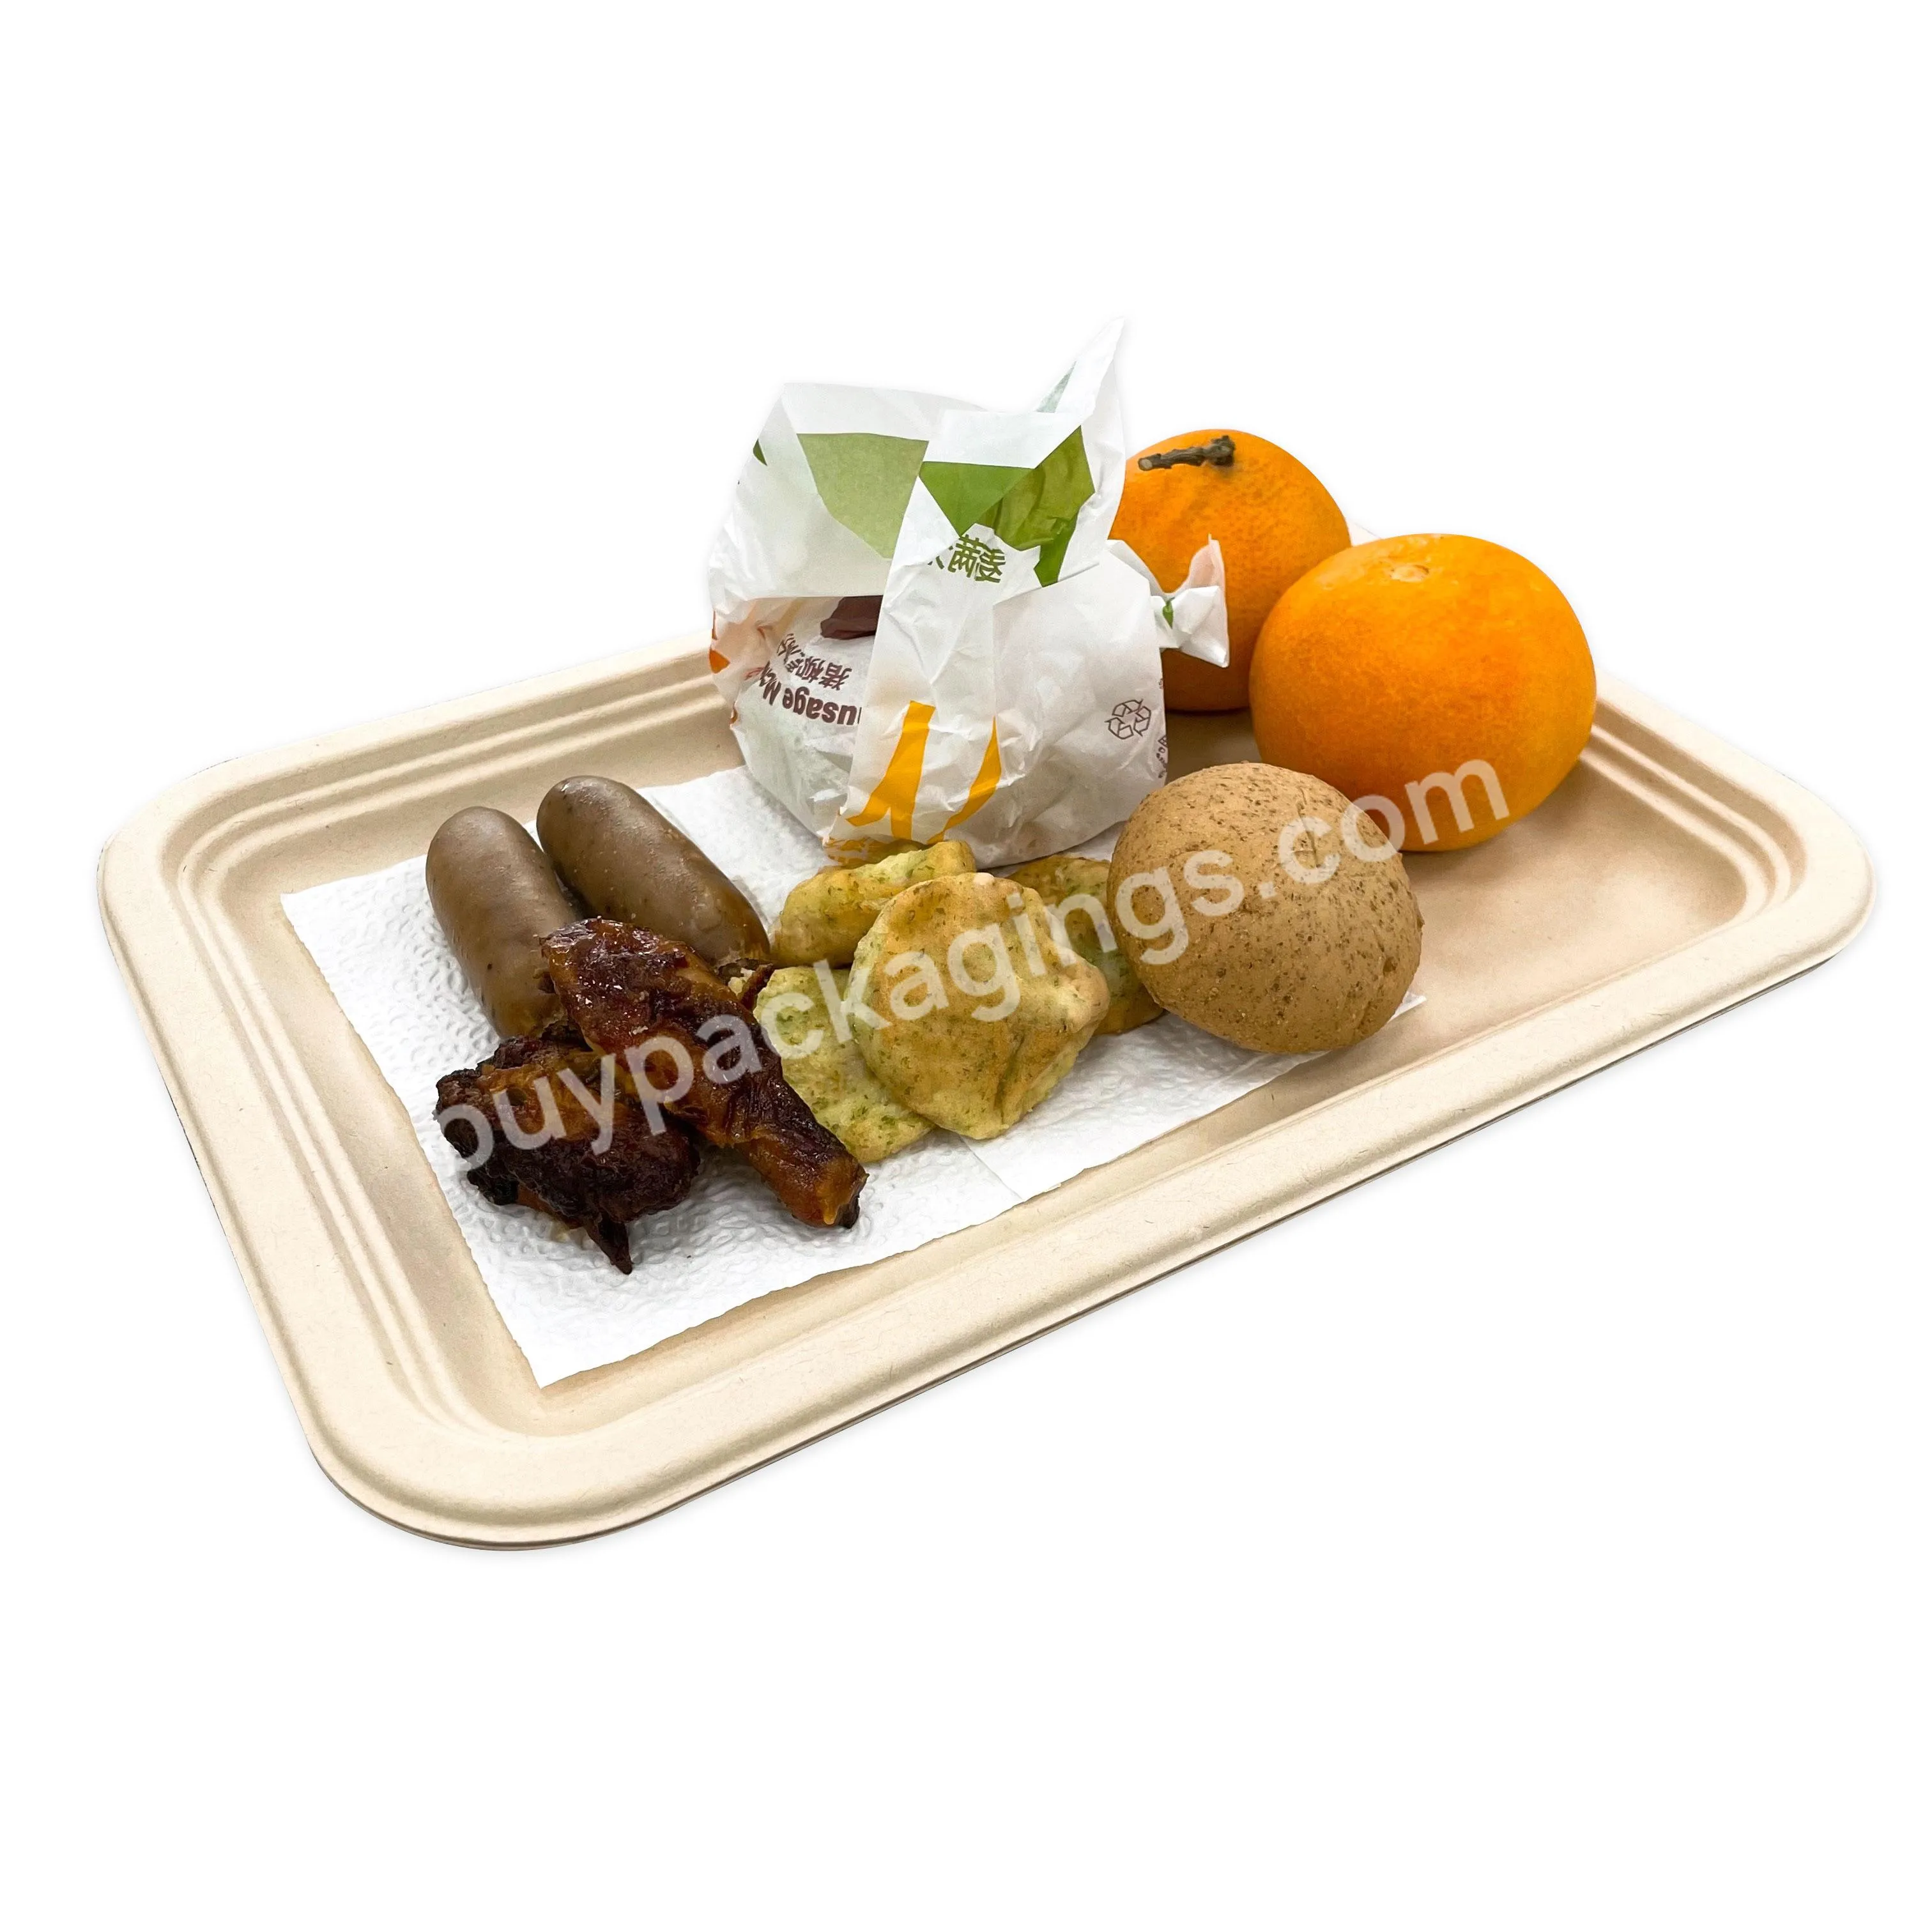 New Design Sugarcane Food Rectangle Disposable Plastic Wood White Party Serving Plates Tray - Buy Plastic Rectangle Plates Disposable Party,Sugarcane Plates Rectangle New Design,Sugarcane Food Rectangle Tray.